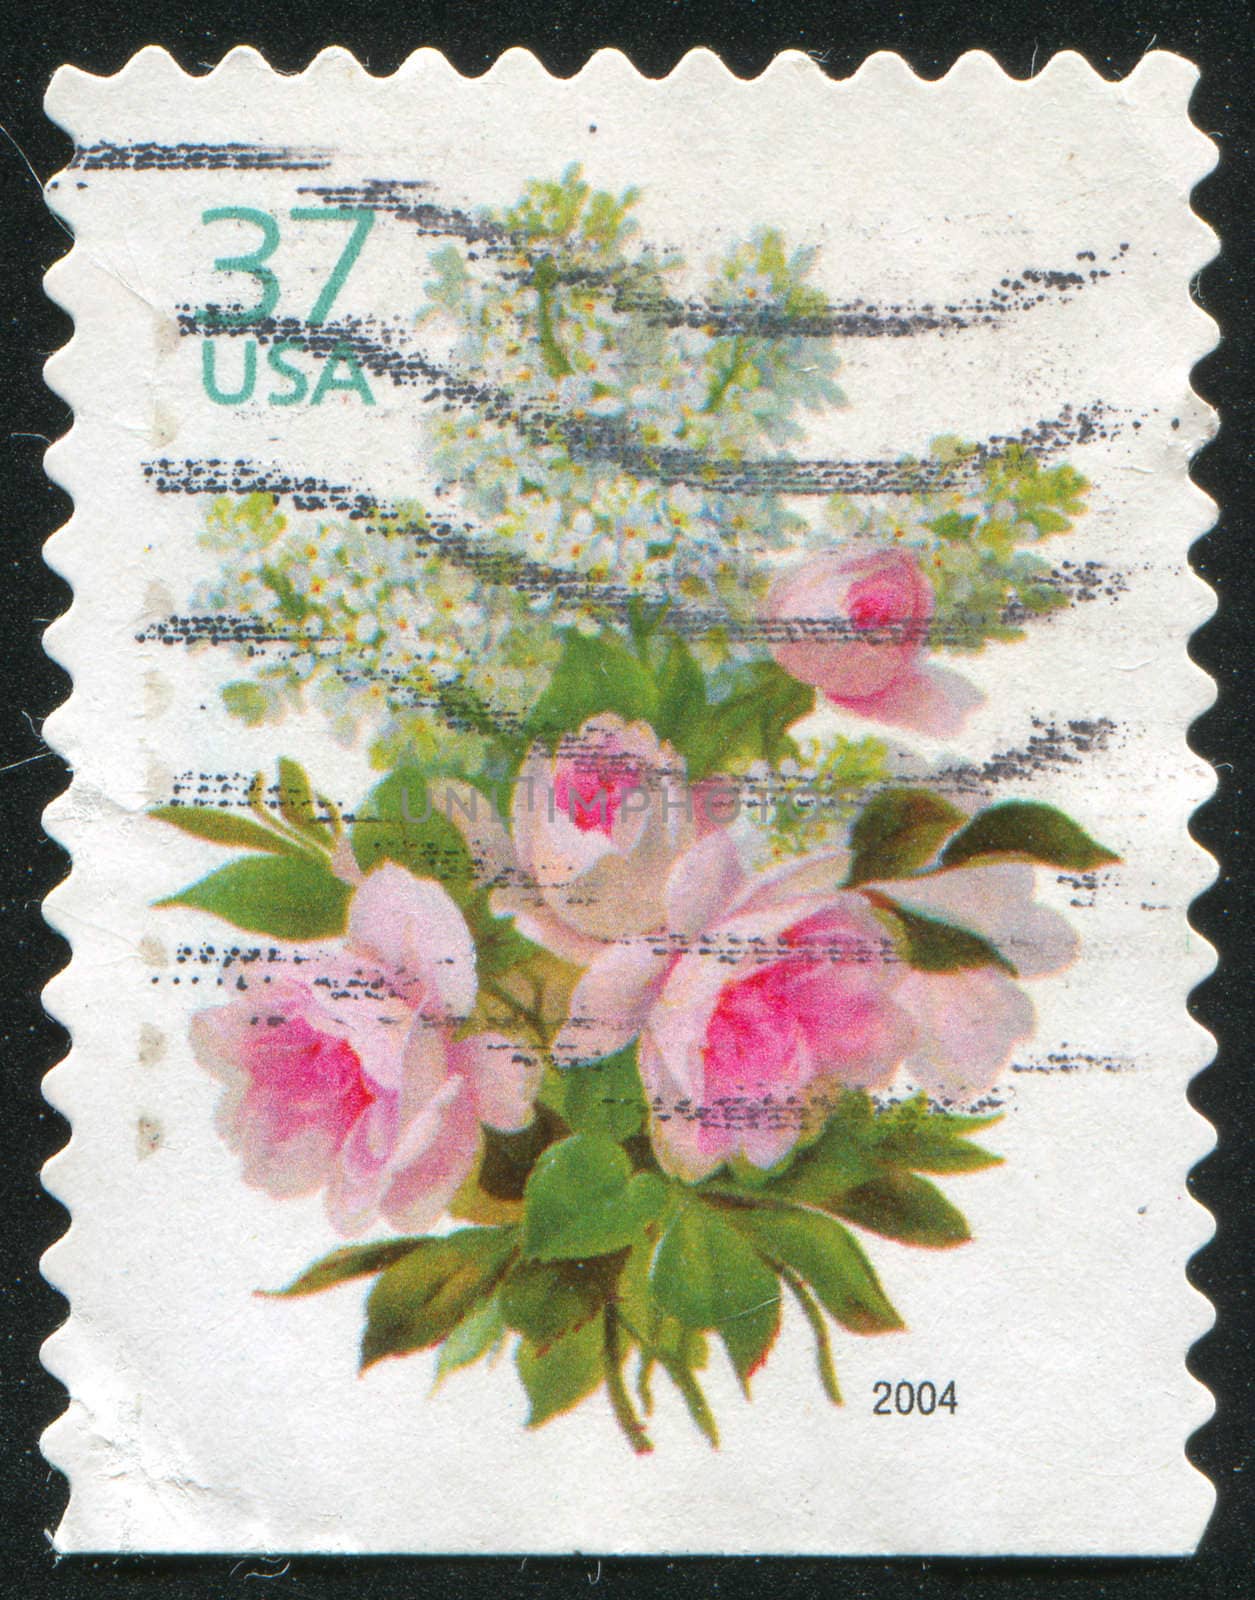 UNITED STATES - CIRCA 2004: stamp printed by United states, shows rose, circa 2004